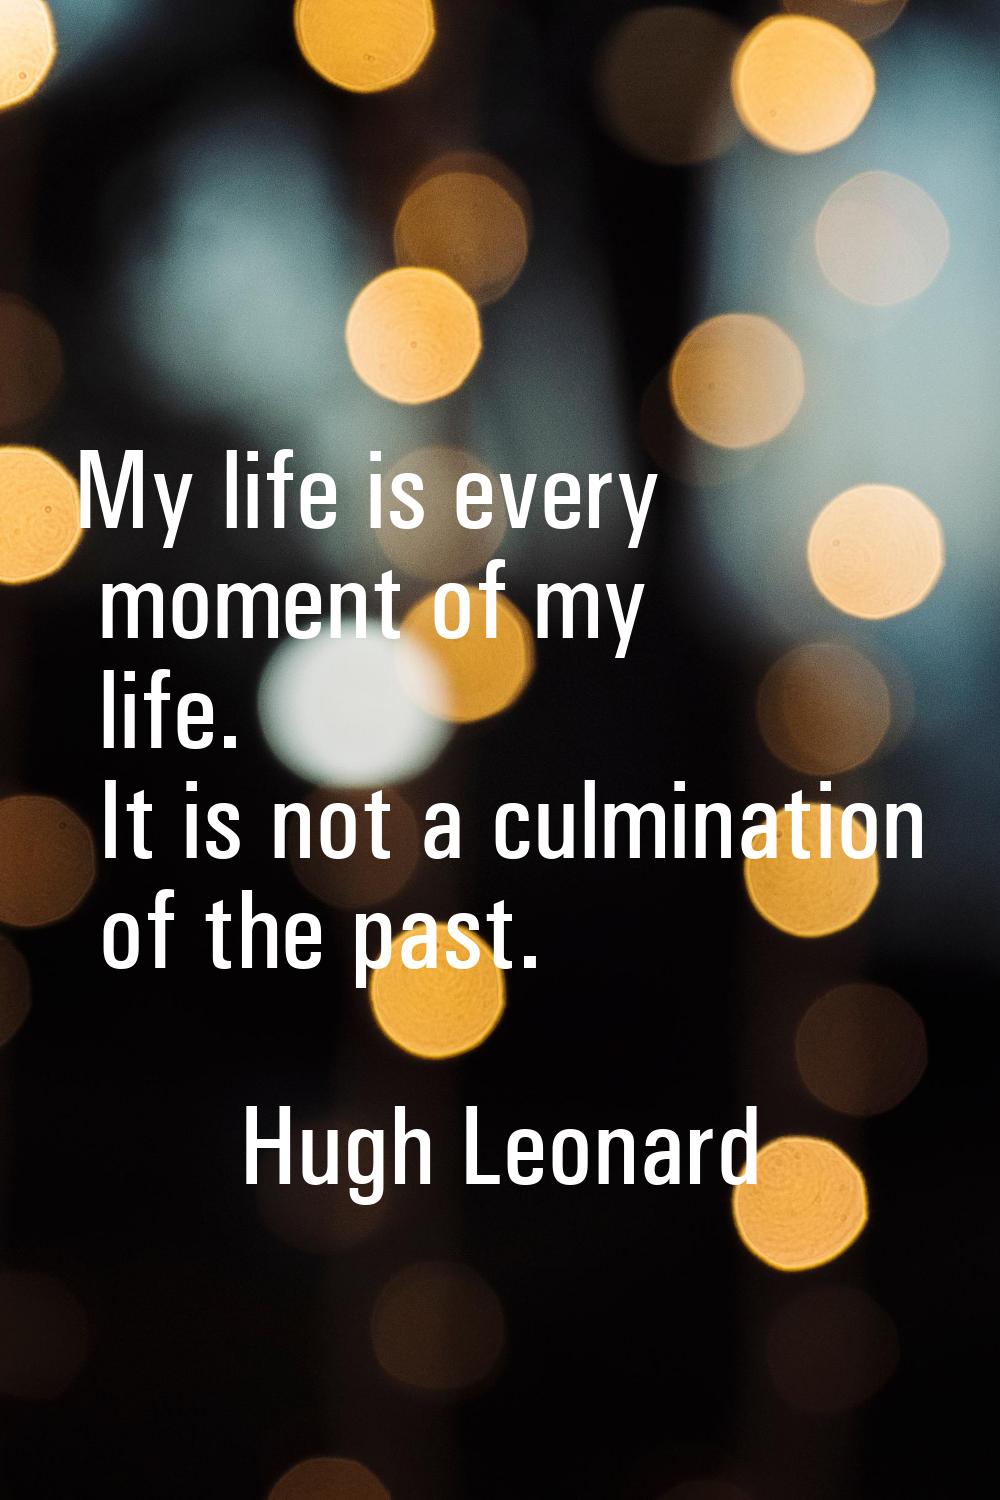 My life is every moment of my life. It is not a culmination of the past.